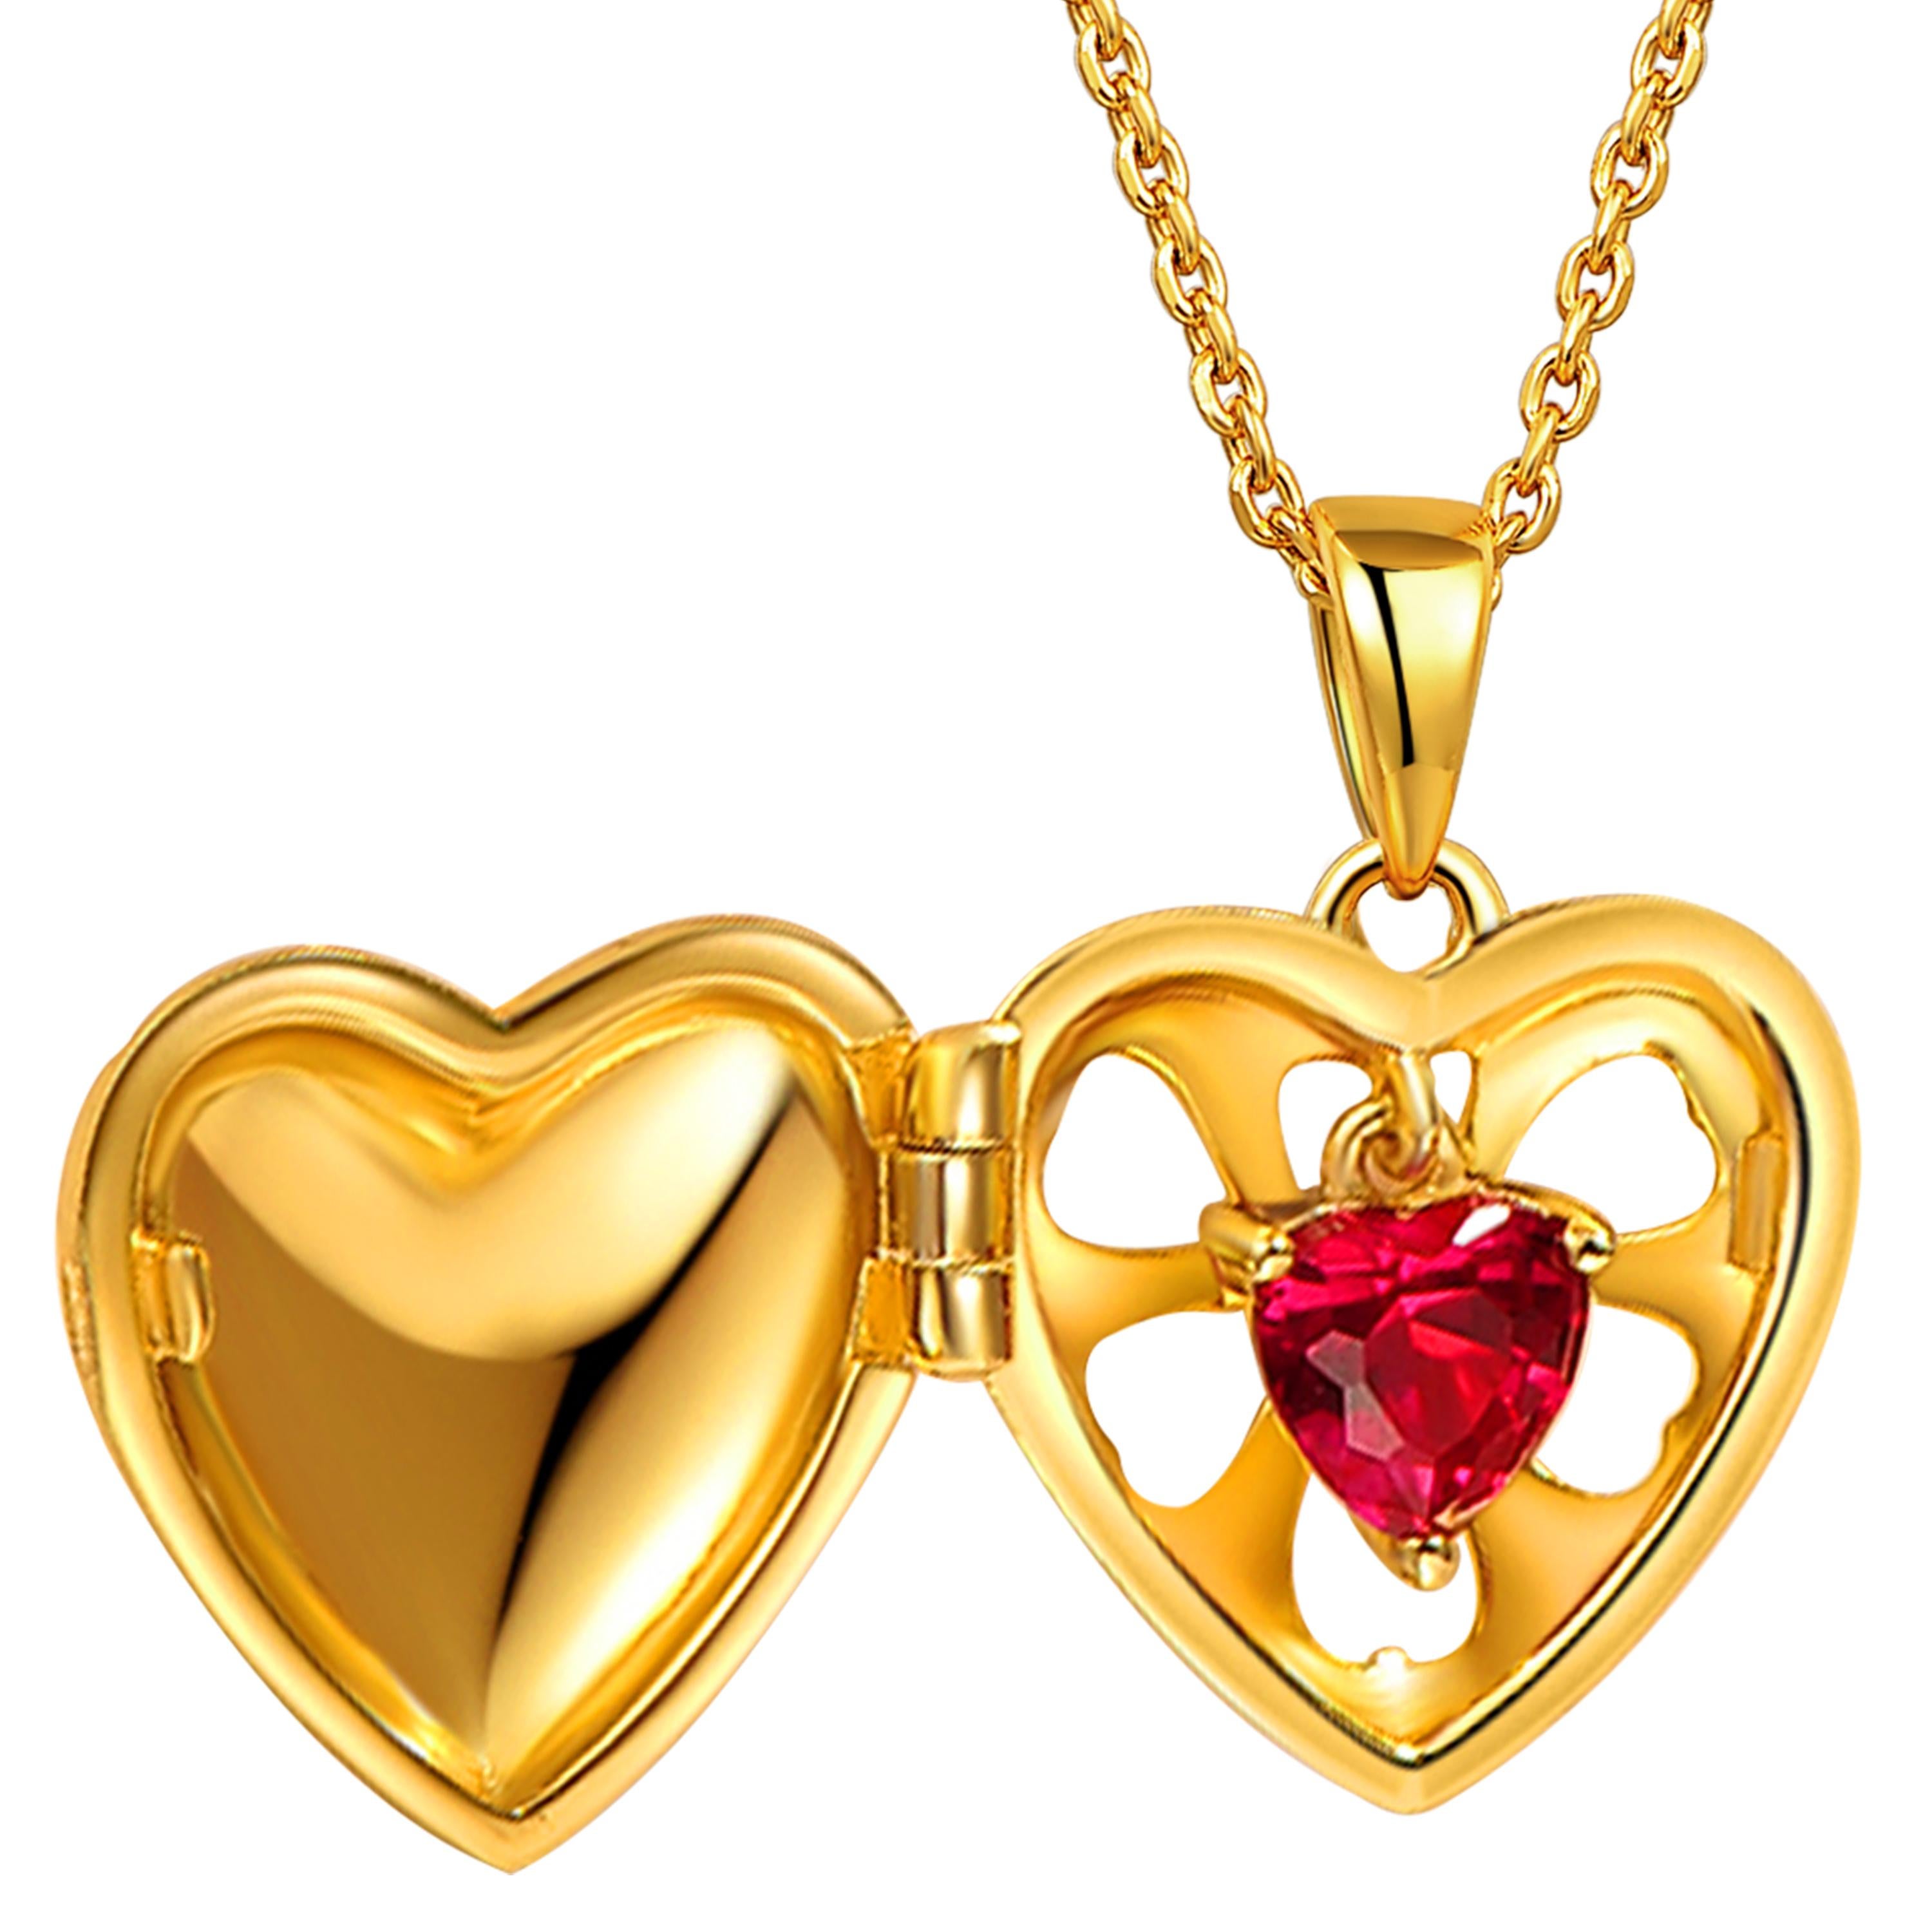 The limited-edition Love Heart Collection is the epitome of love is love, and it knows no bounds. The heart motifs of the Love Heart make for a much-loved gift for Valentine’s Day. This locket is inscribed with the word ‘love’ and features a secret